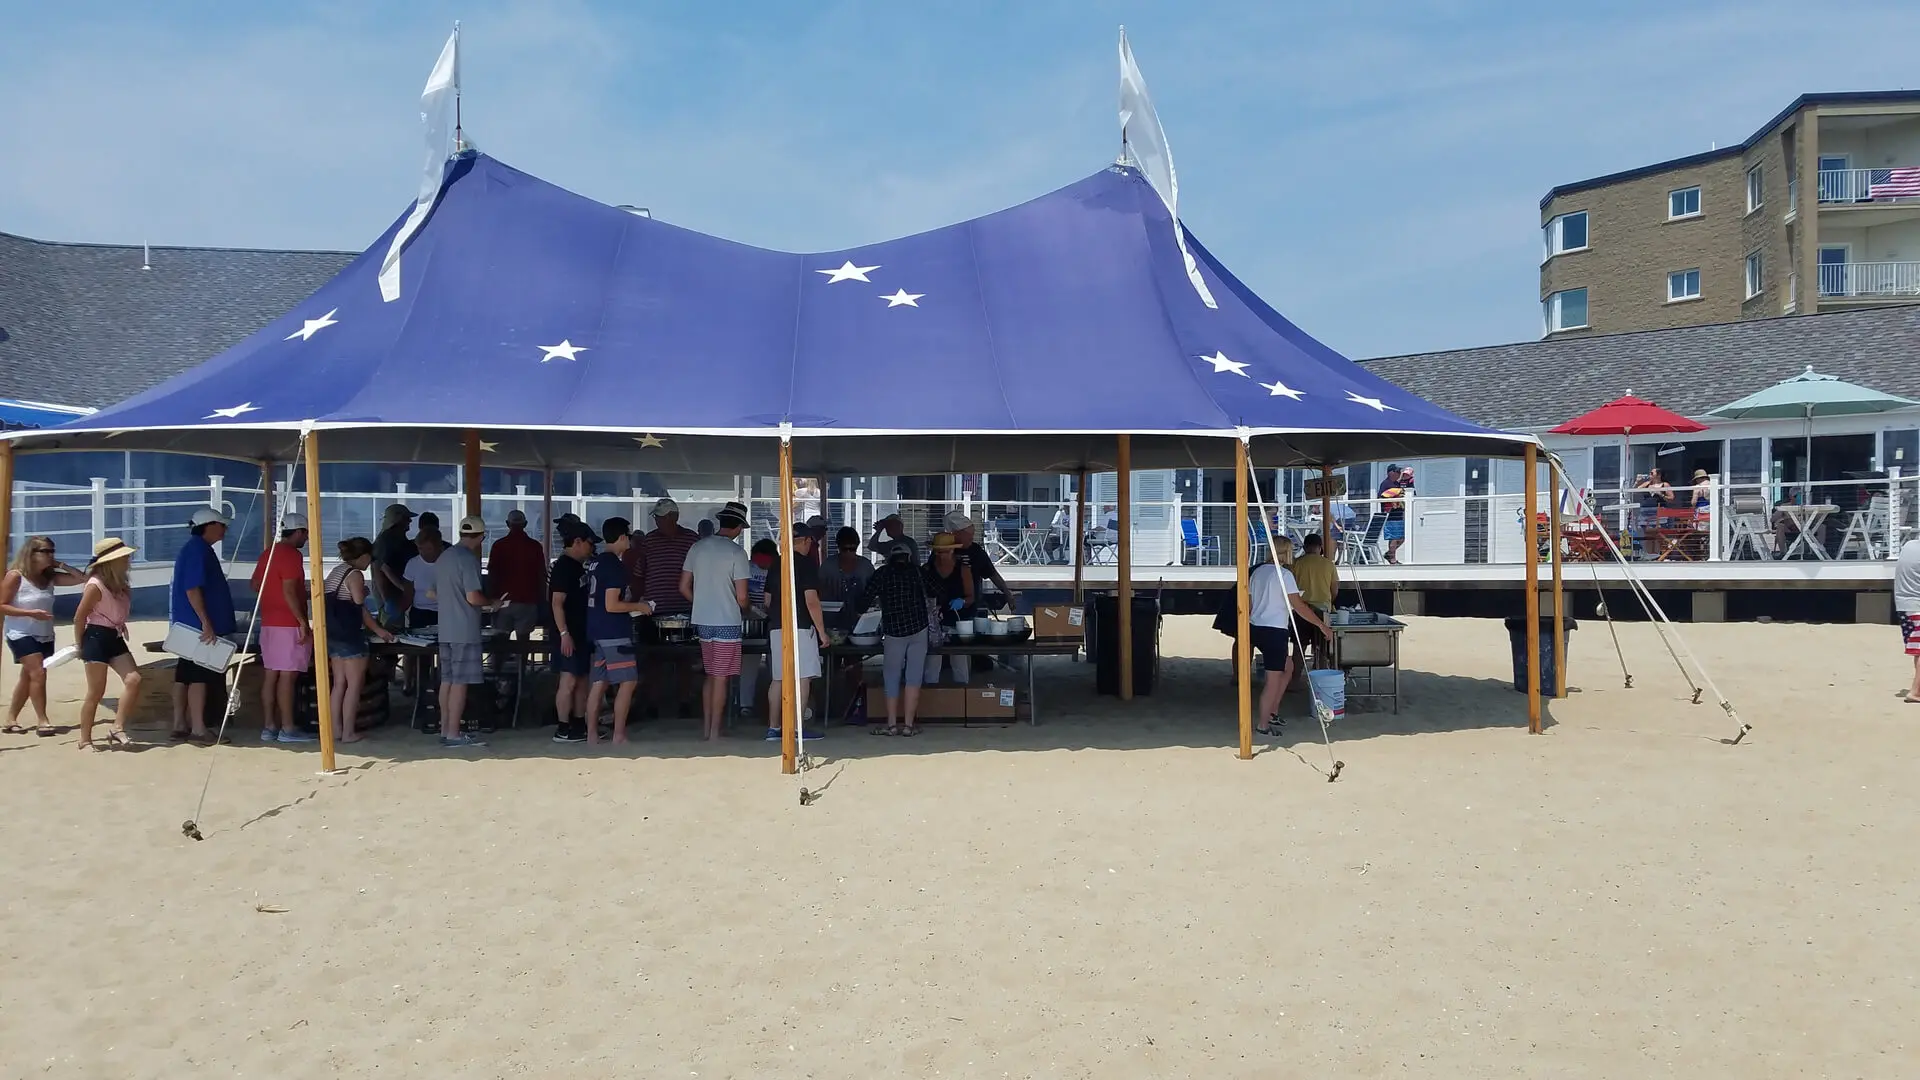 A group of people sitting under an awning on the beach.